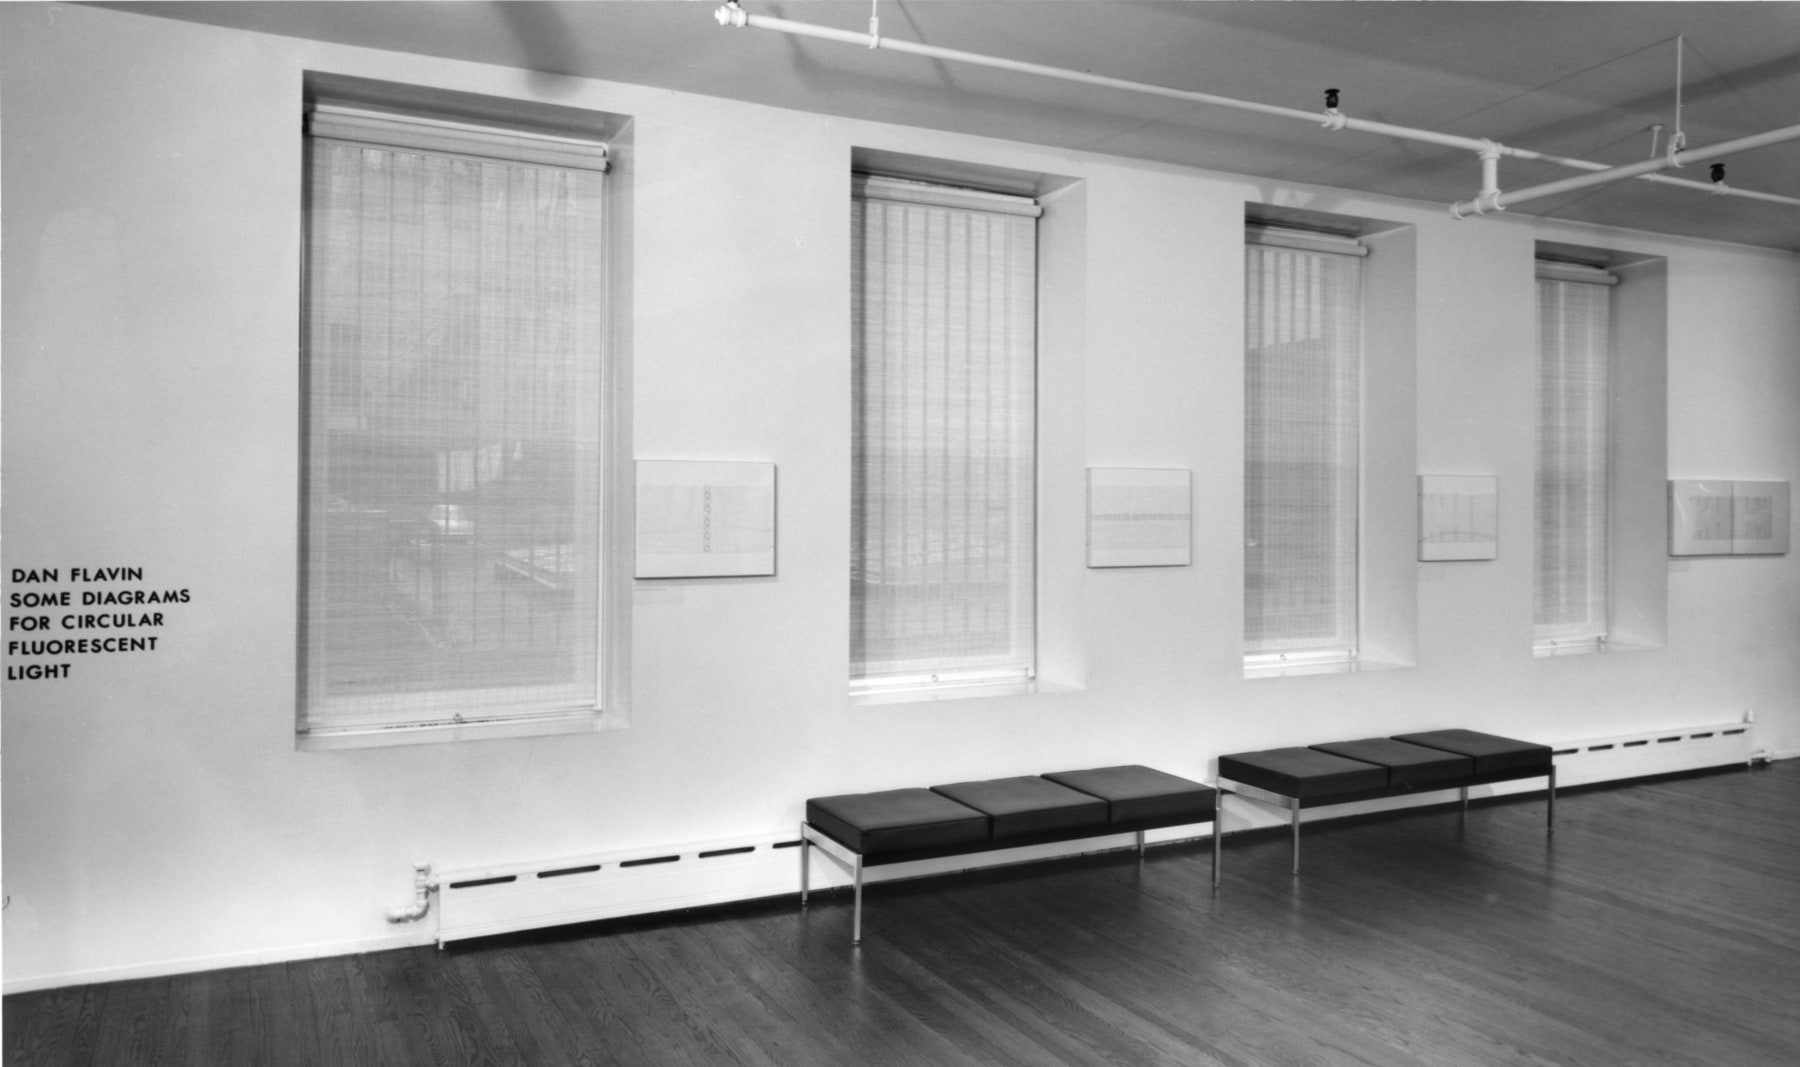 Installation view, Dan Flavin: Some Diagrams for Circular Fluorescent Light, 420 WEST BROADWAY